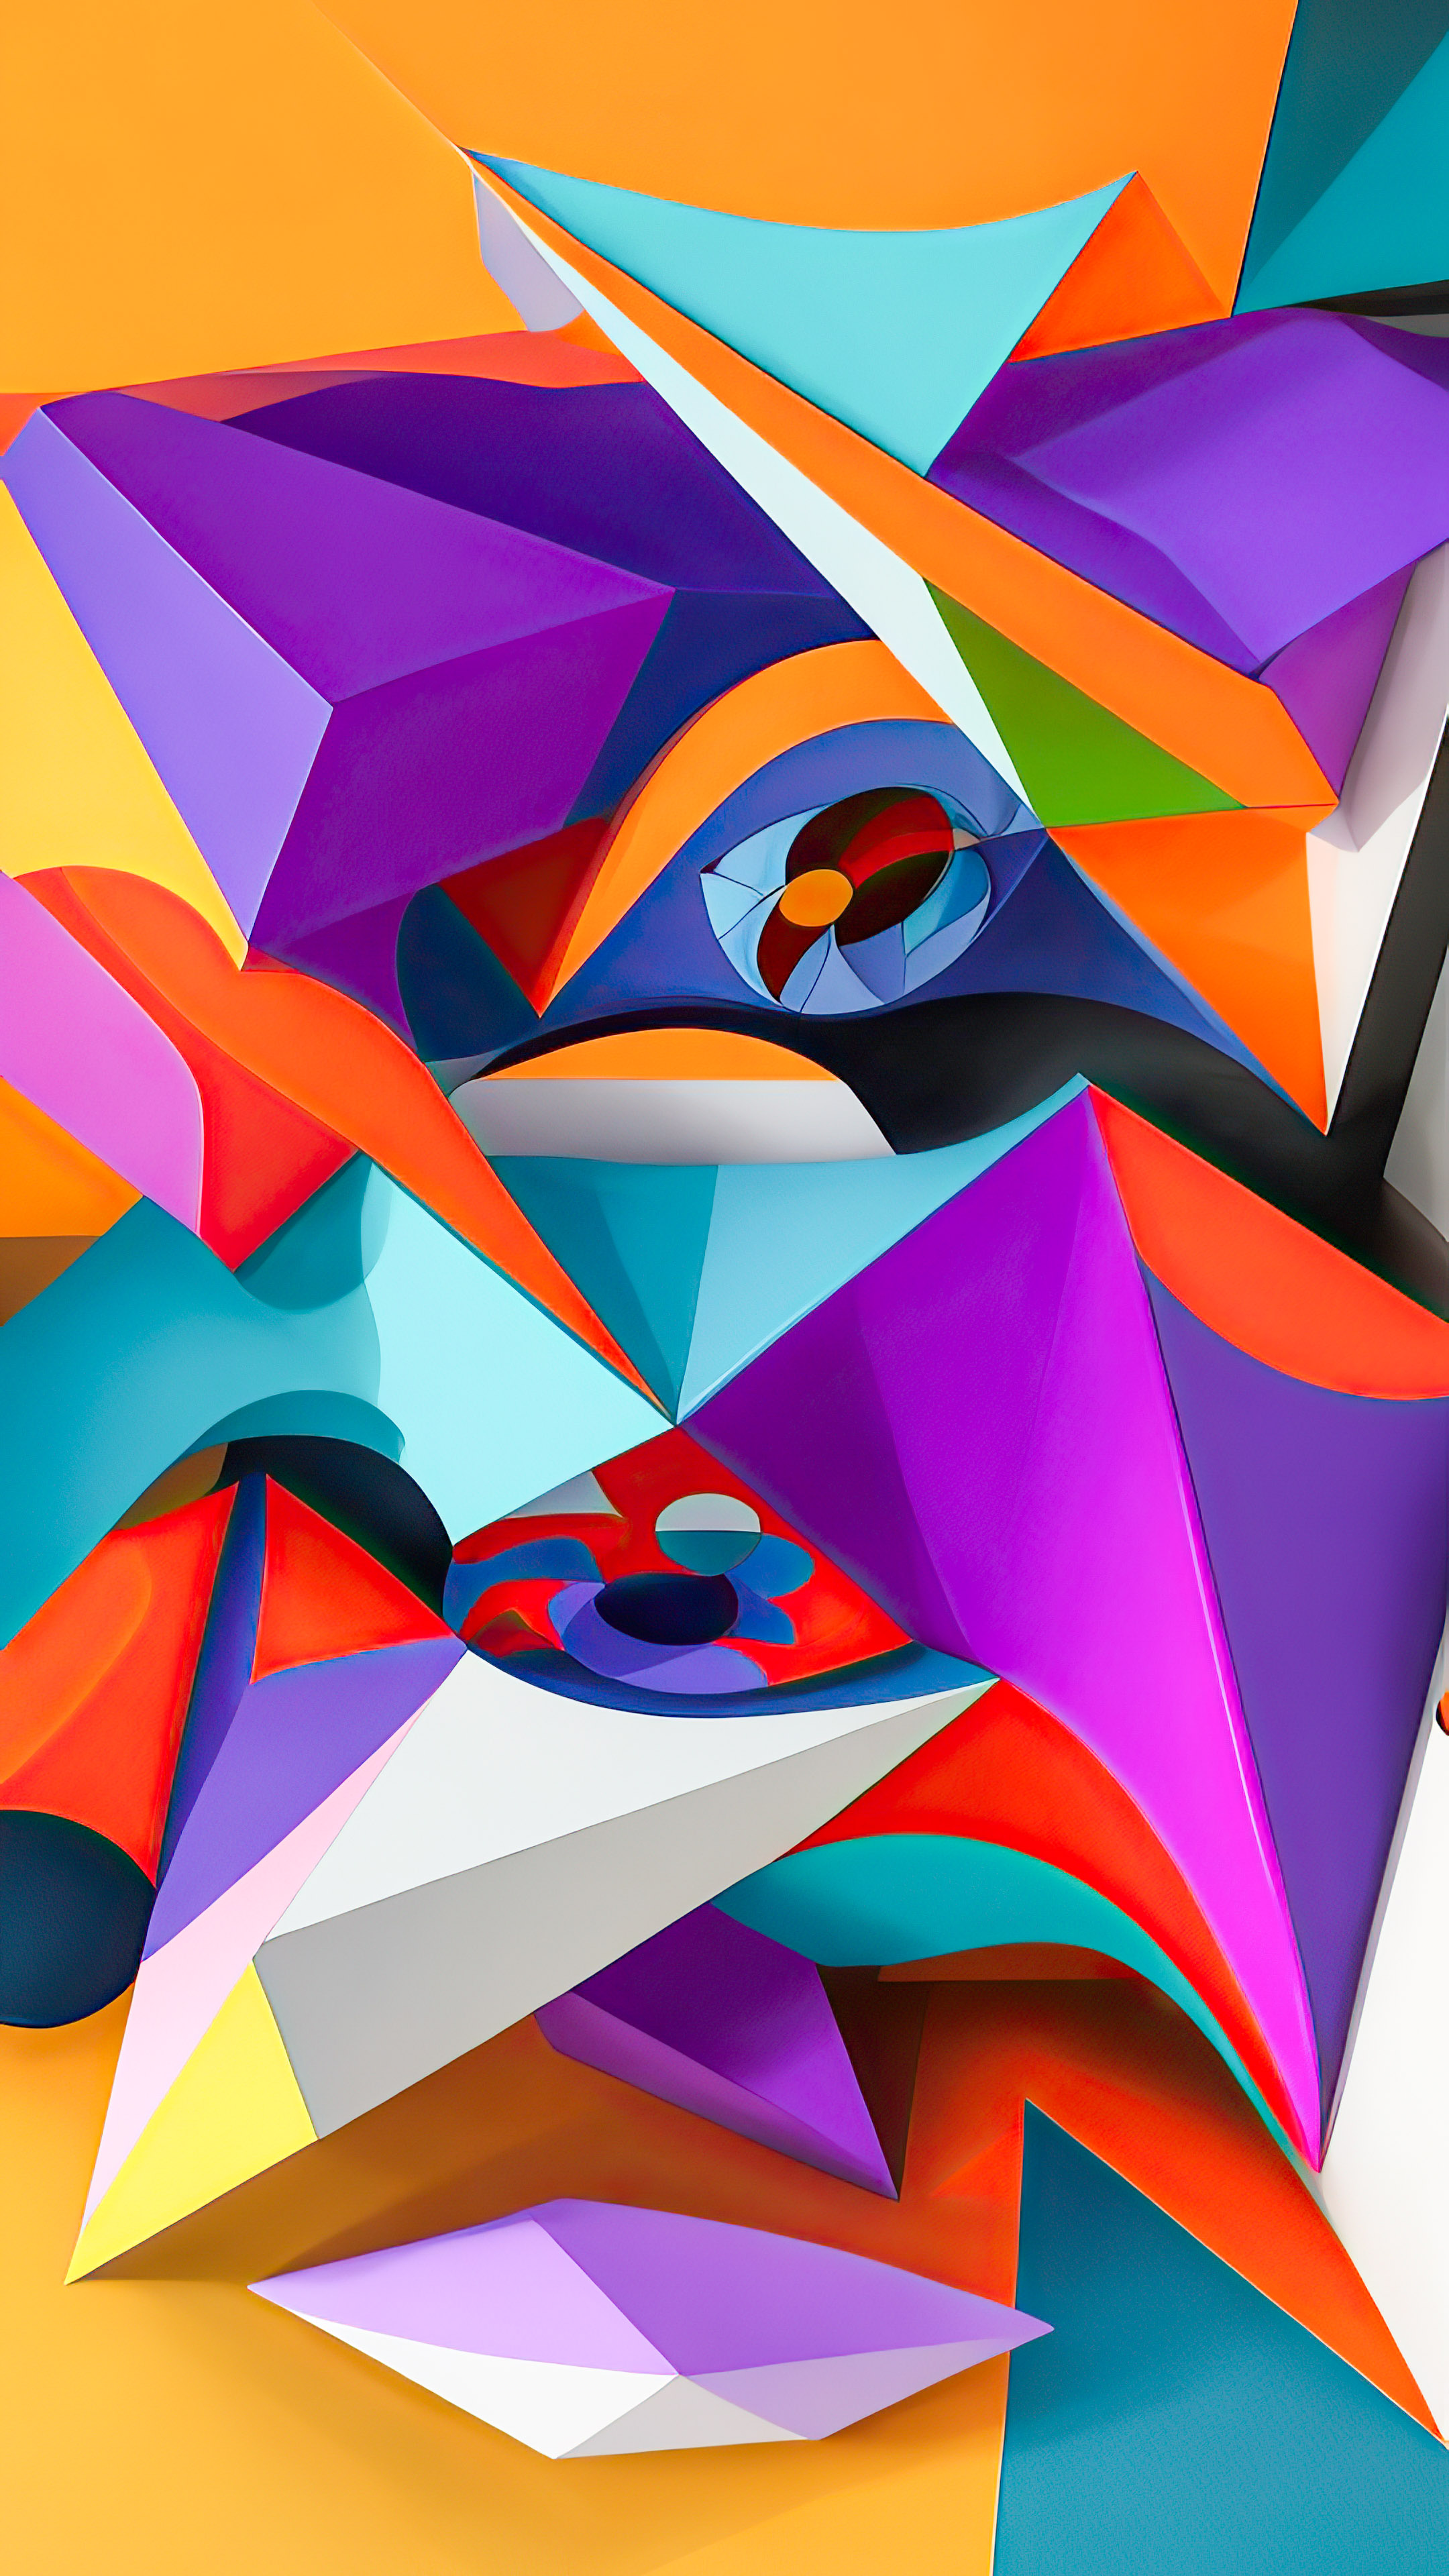 Experience the depth of 3D geometrical art on your mobile with our abstract wallpaper in 4K resolution.